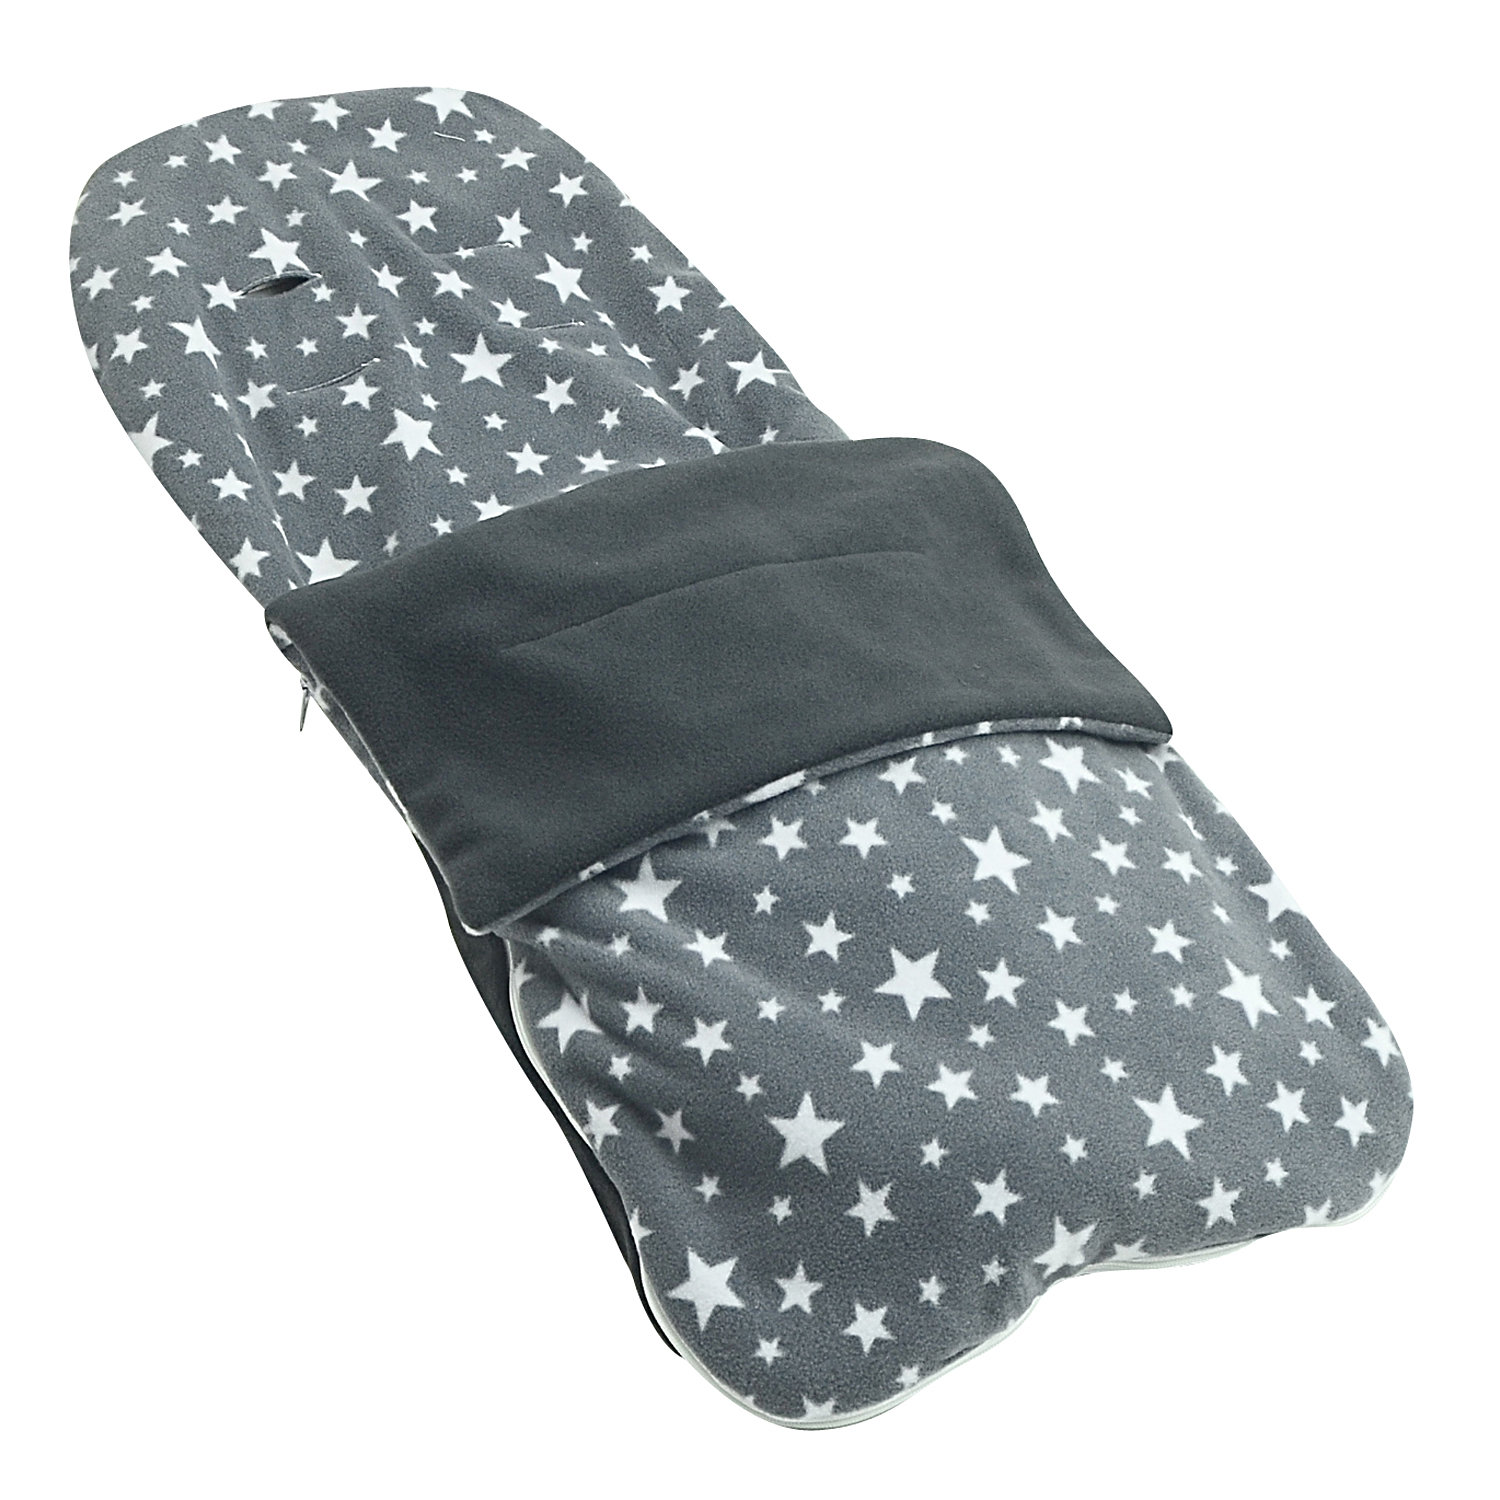 Snuggle Summer Footmuff Compatible With Mountain Buggy Stroller Buggy Pram - Grey Star